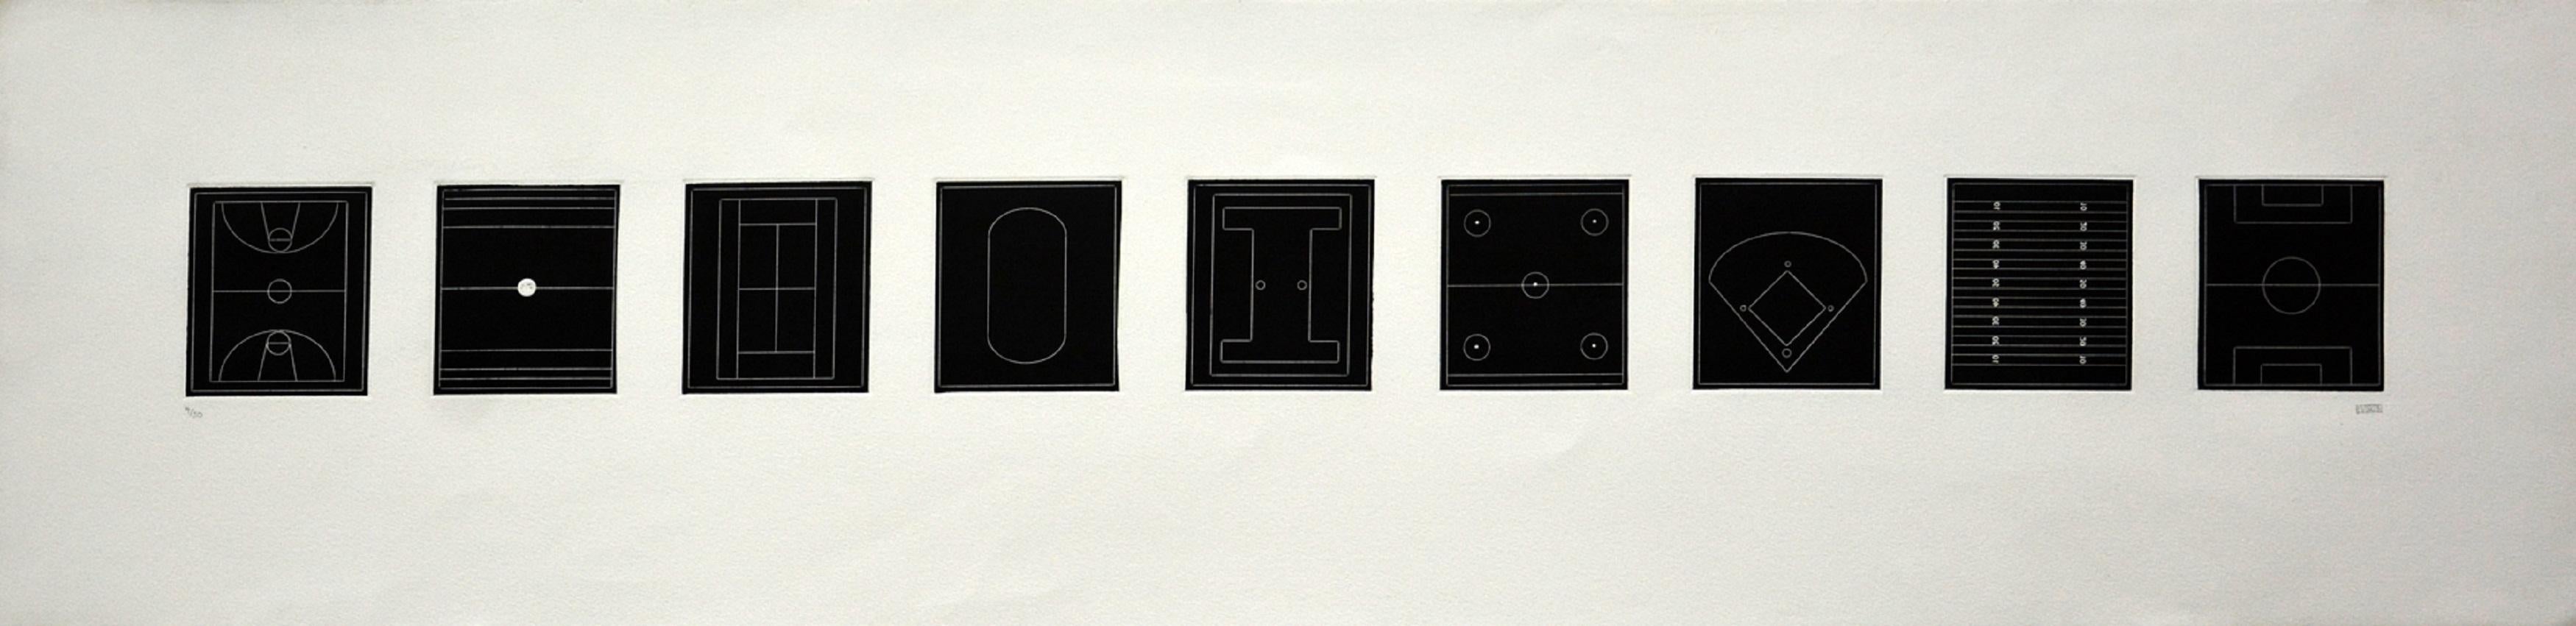 "Boris Viskin (Mexico, 1960)
'Untitled 2', 
woodcut on paper Velin Arches 300 g.
13.2 x 52.8 in. (33.5 x 134 cm.)
Edition of 30
ID: VIS-102"